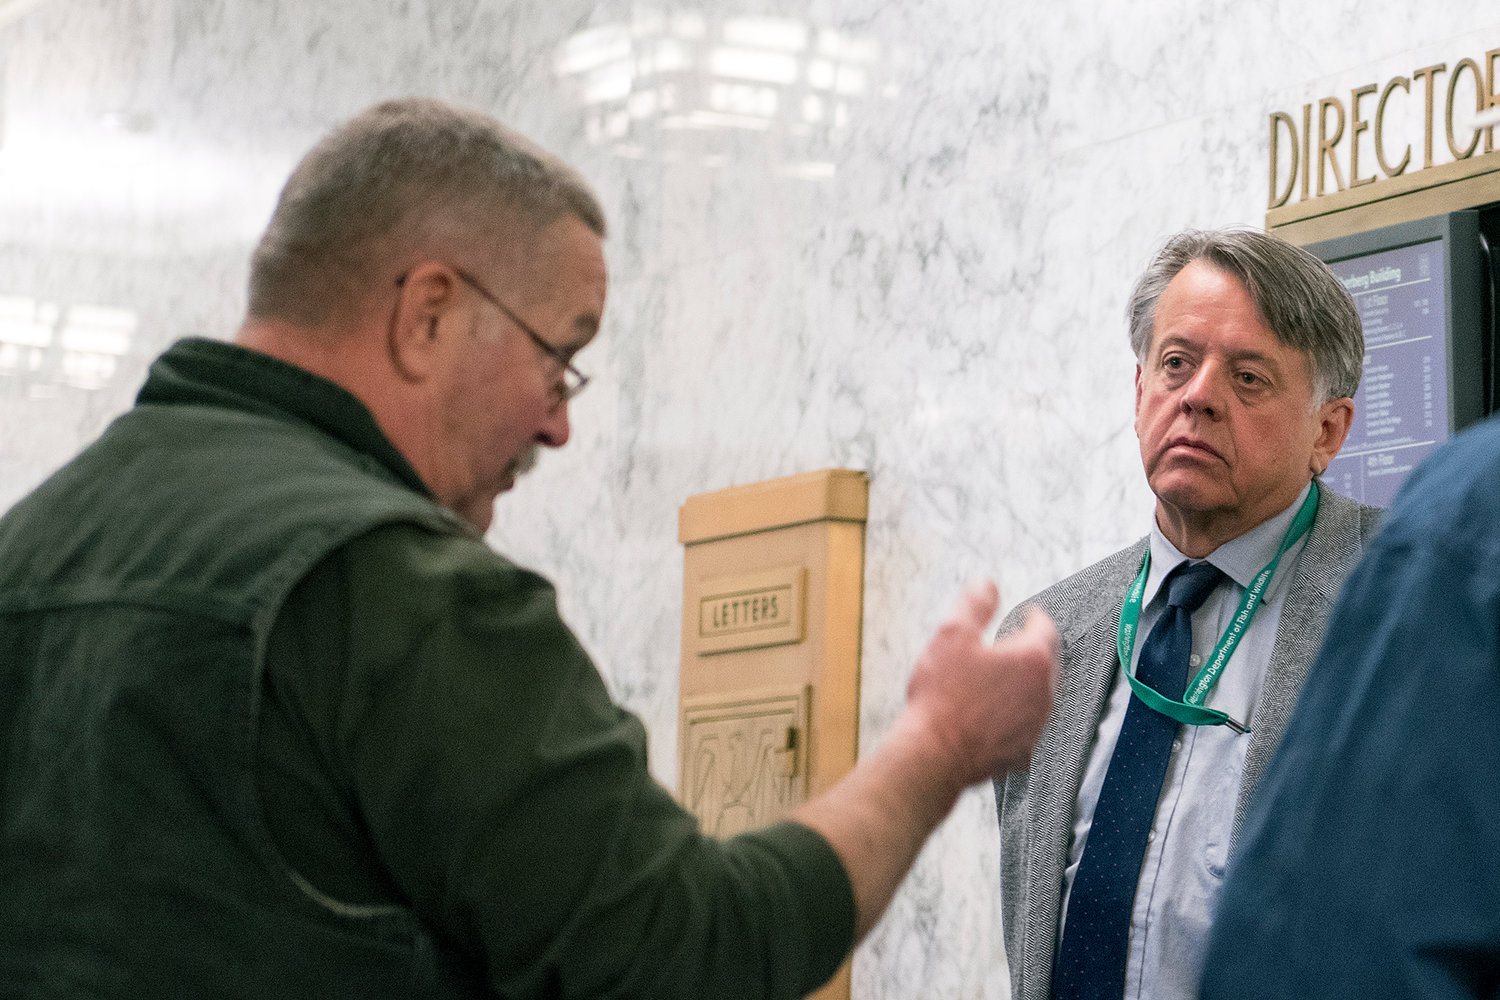 WDFW Director Jim Unsworth listens as a concerned citizen voices his opinions on the lost fish from the Cowlitz Trout Hatchery after a hearing in Olympia on Thursday afternoon.